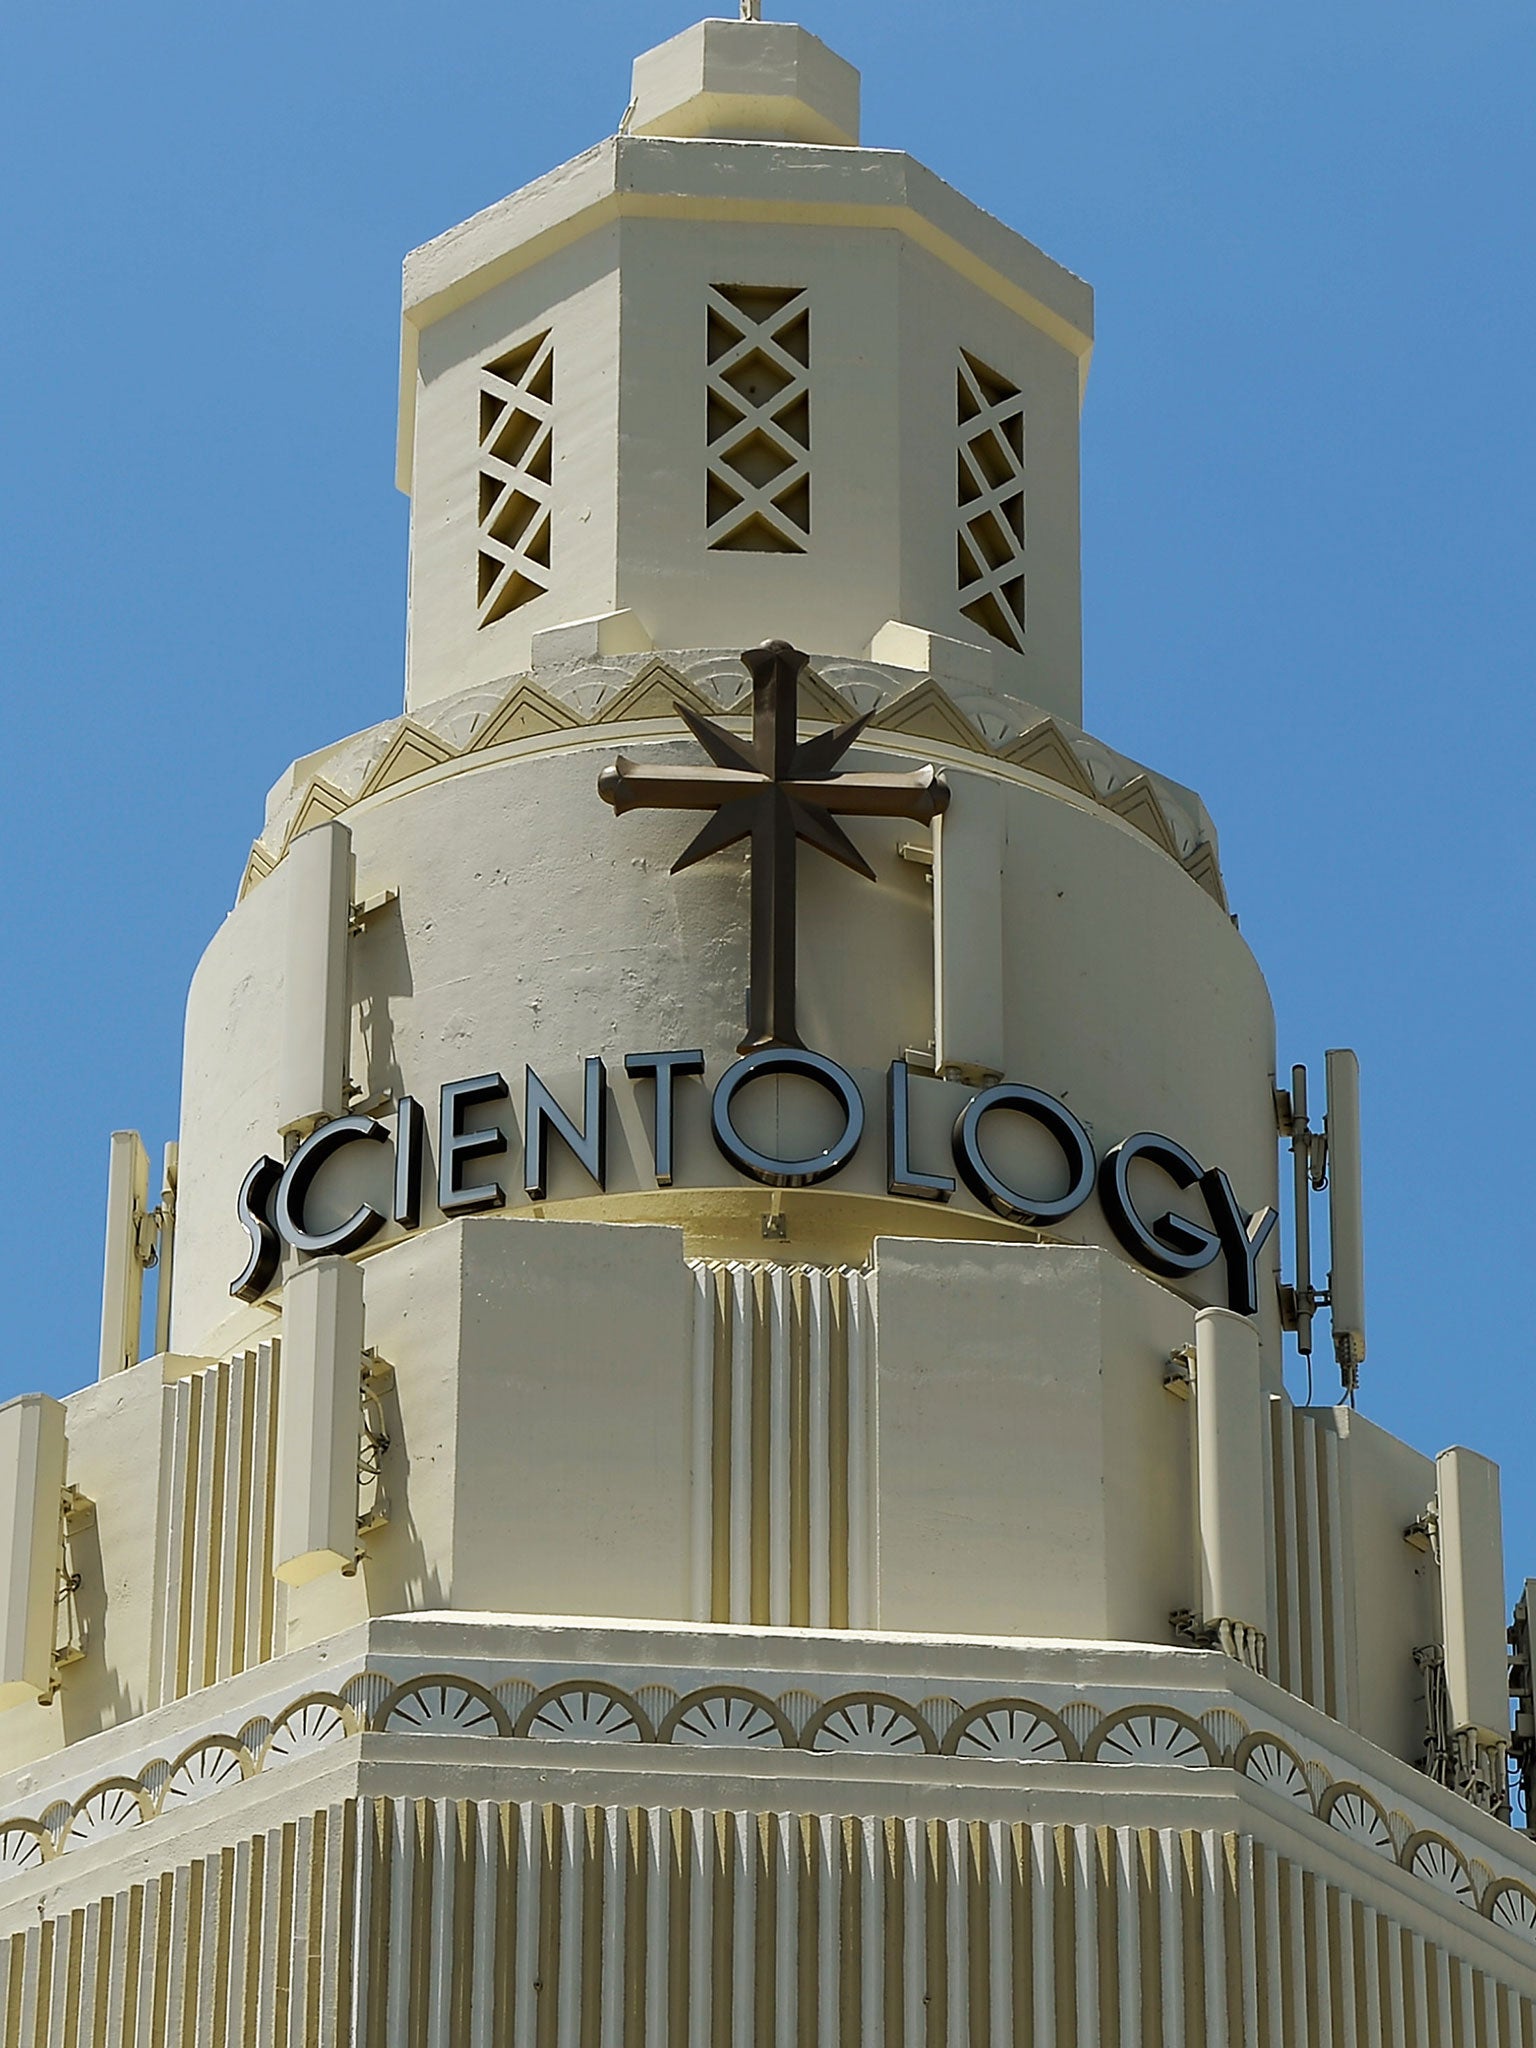 The Church of Scientology community center in the neighborhood of South Los Angeles